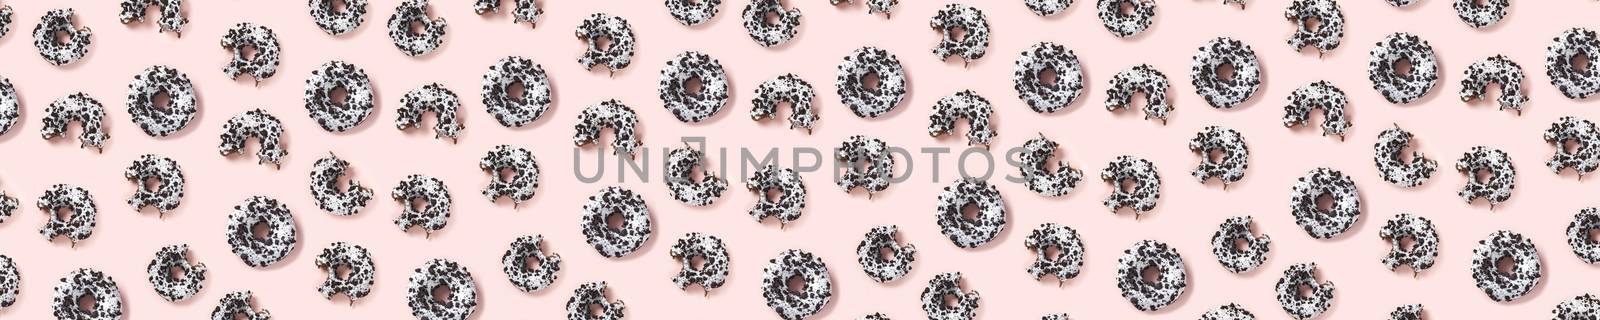 donuts on a pink background top view. Flat lay of delicious nibbled chocolate donuts. used as donut banner or poster background, not pattern. by PhotoTime